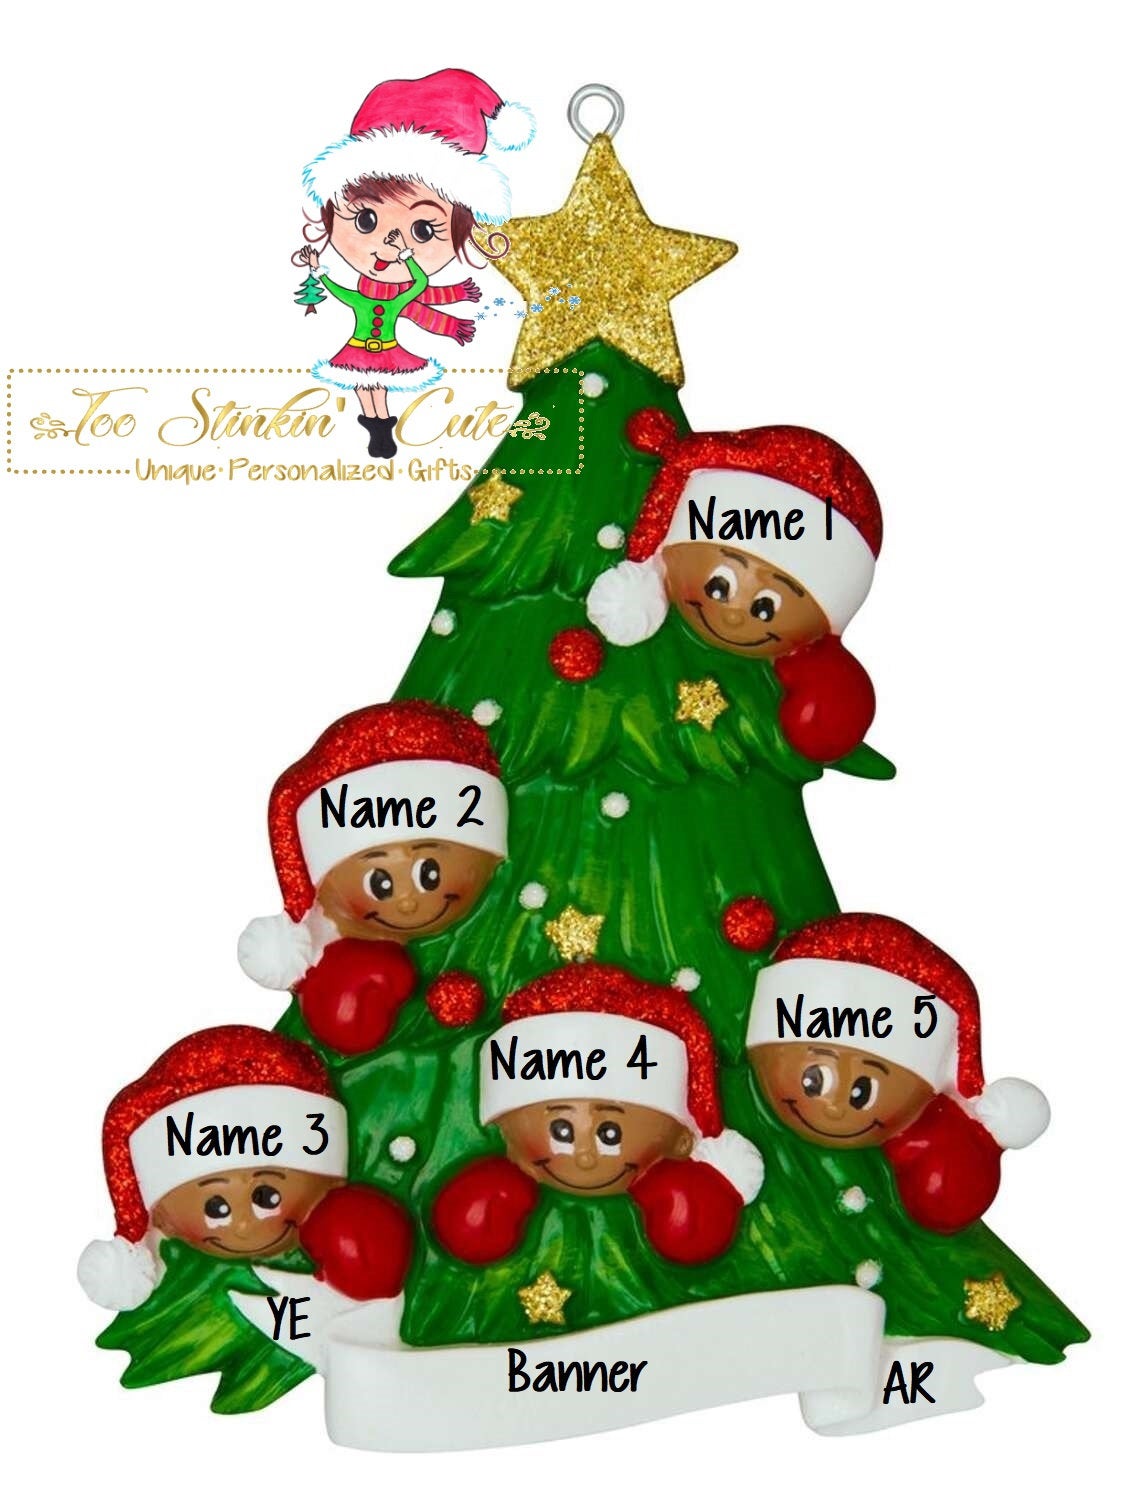 Personalized Christmas Ornament Christmas Tree Family of 5 African American/Tan/Best Friends/ Coworkers + Free Shipping!